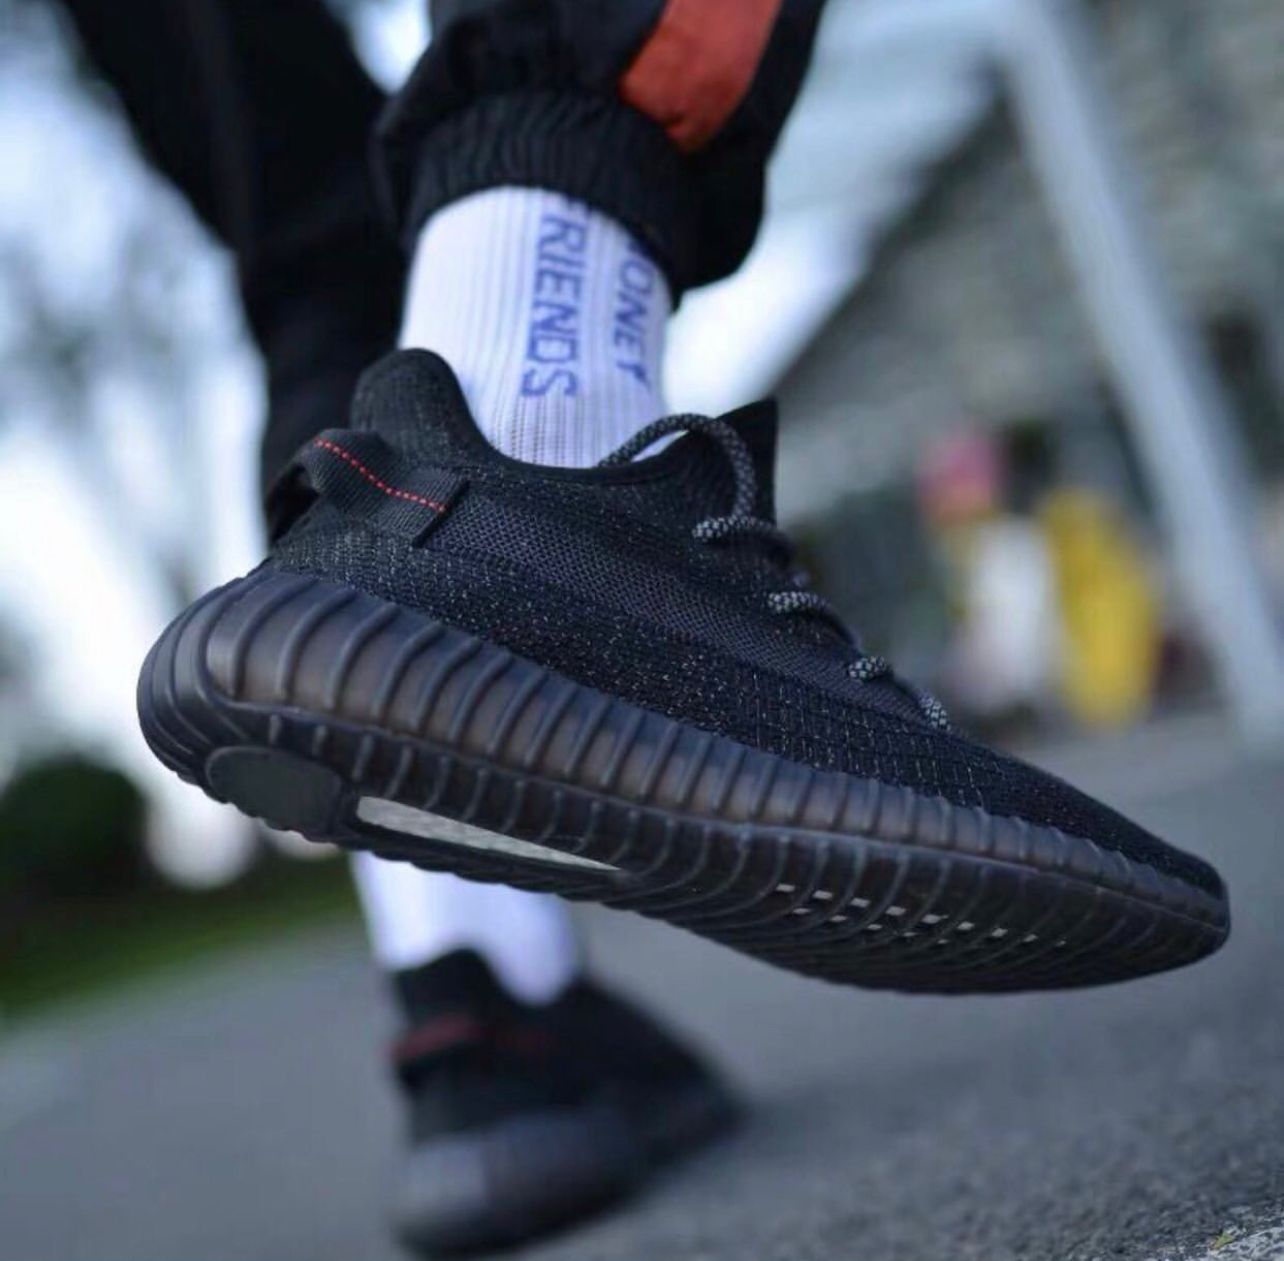 The Best Adidas Yeezy 350 Boost V2 Customs in 2023